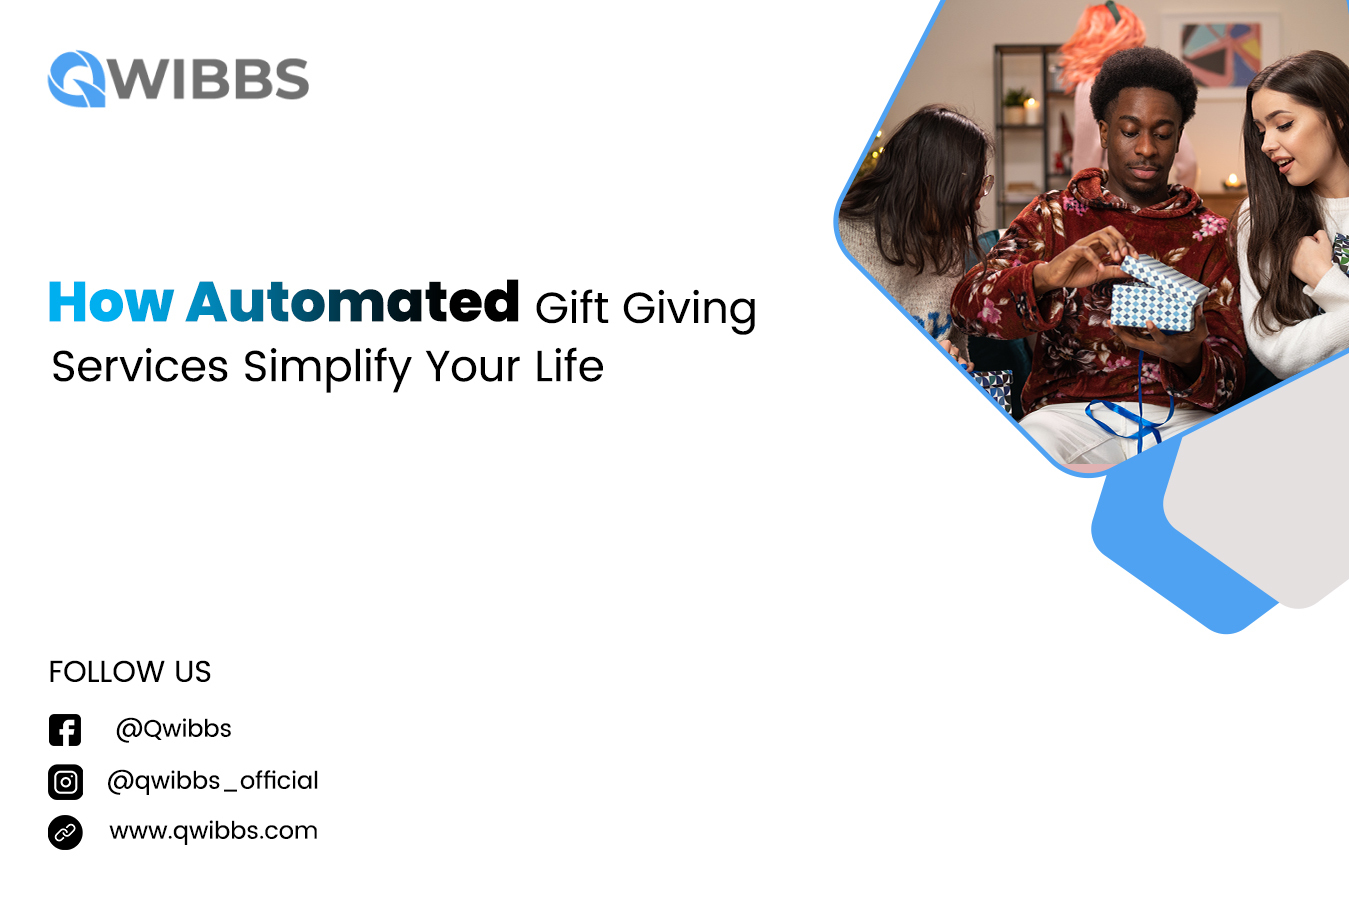 How Automated Gift Giving Services Simplify Your Life